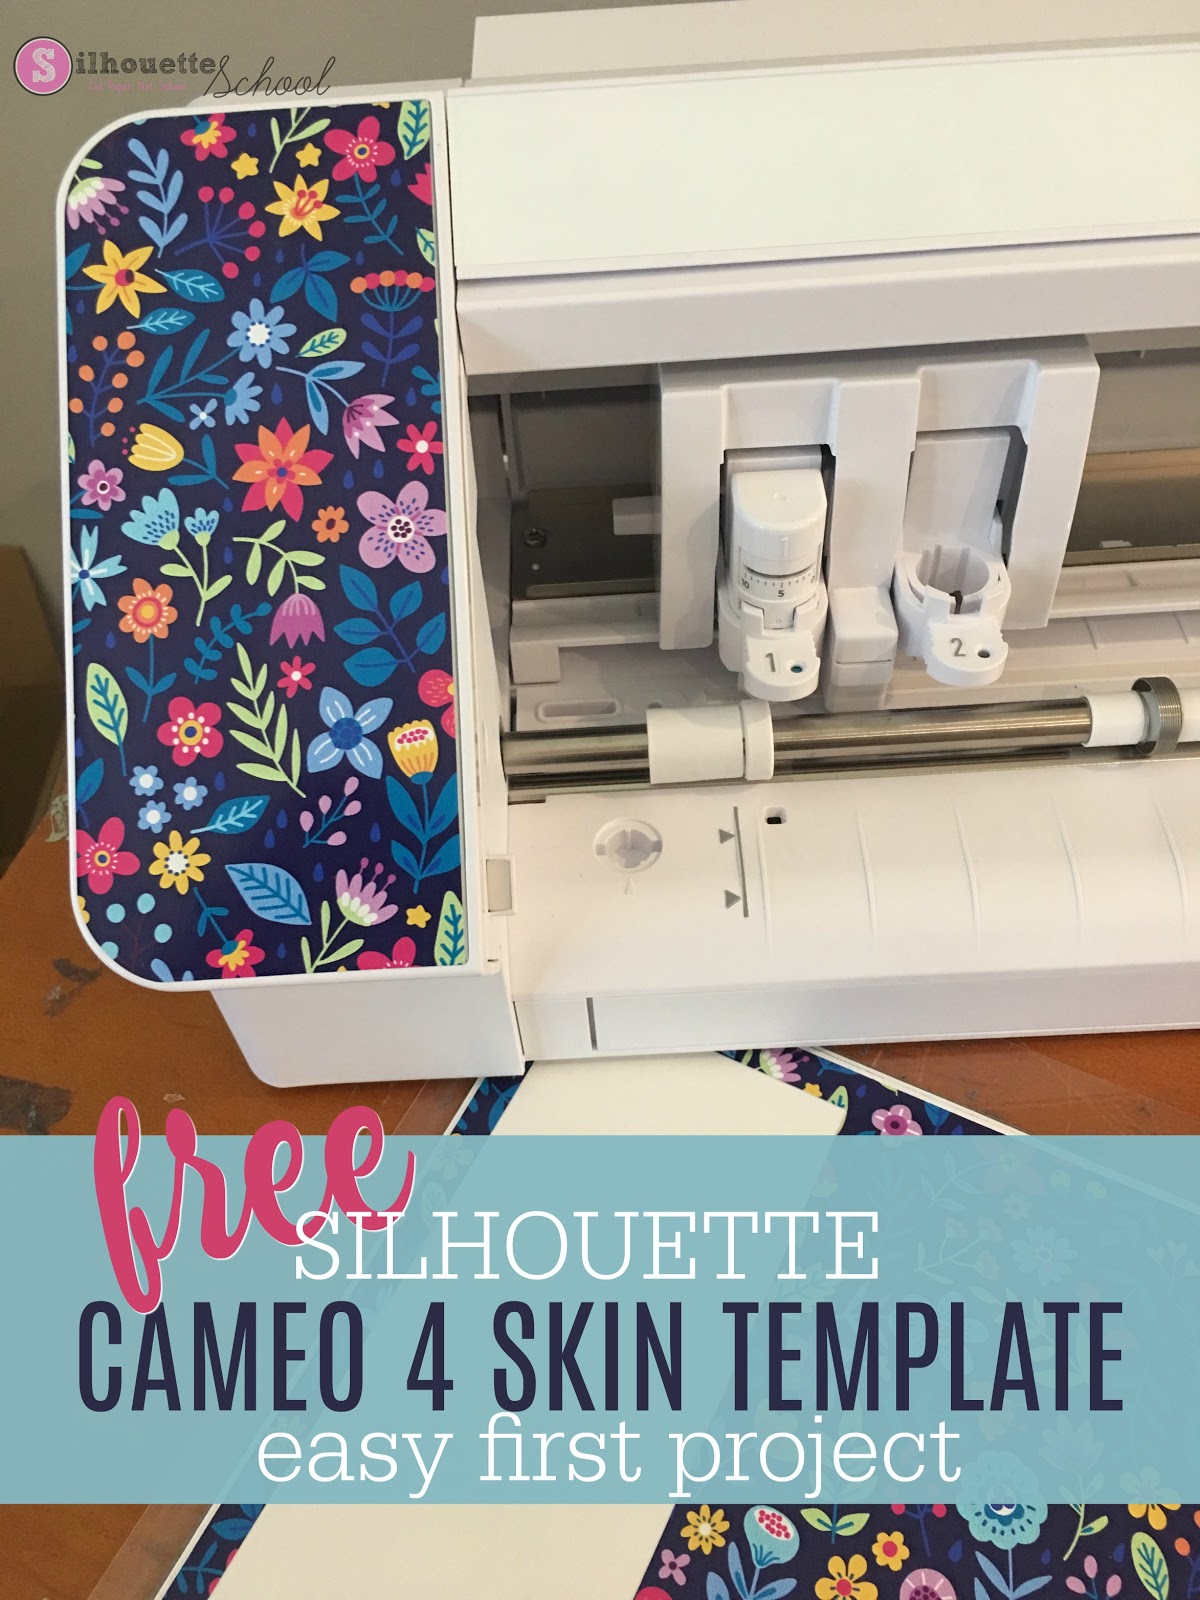 Download Free Silhouette Cameo 4 Skin Template Cut File And Easy First Project Silhouette School